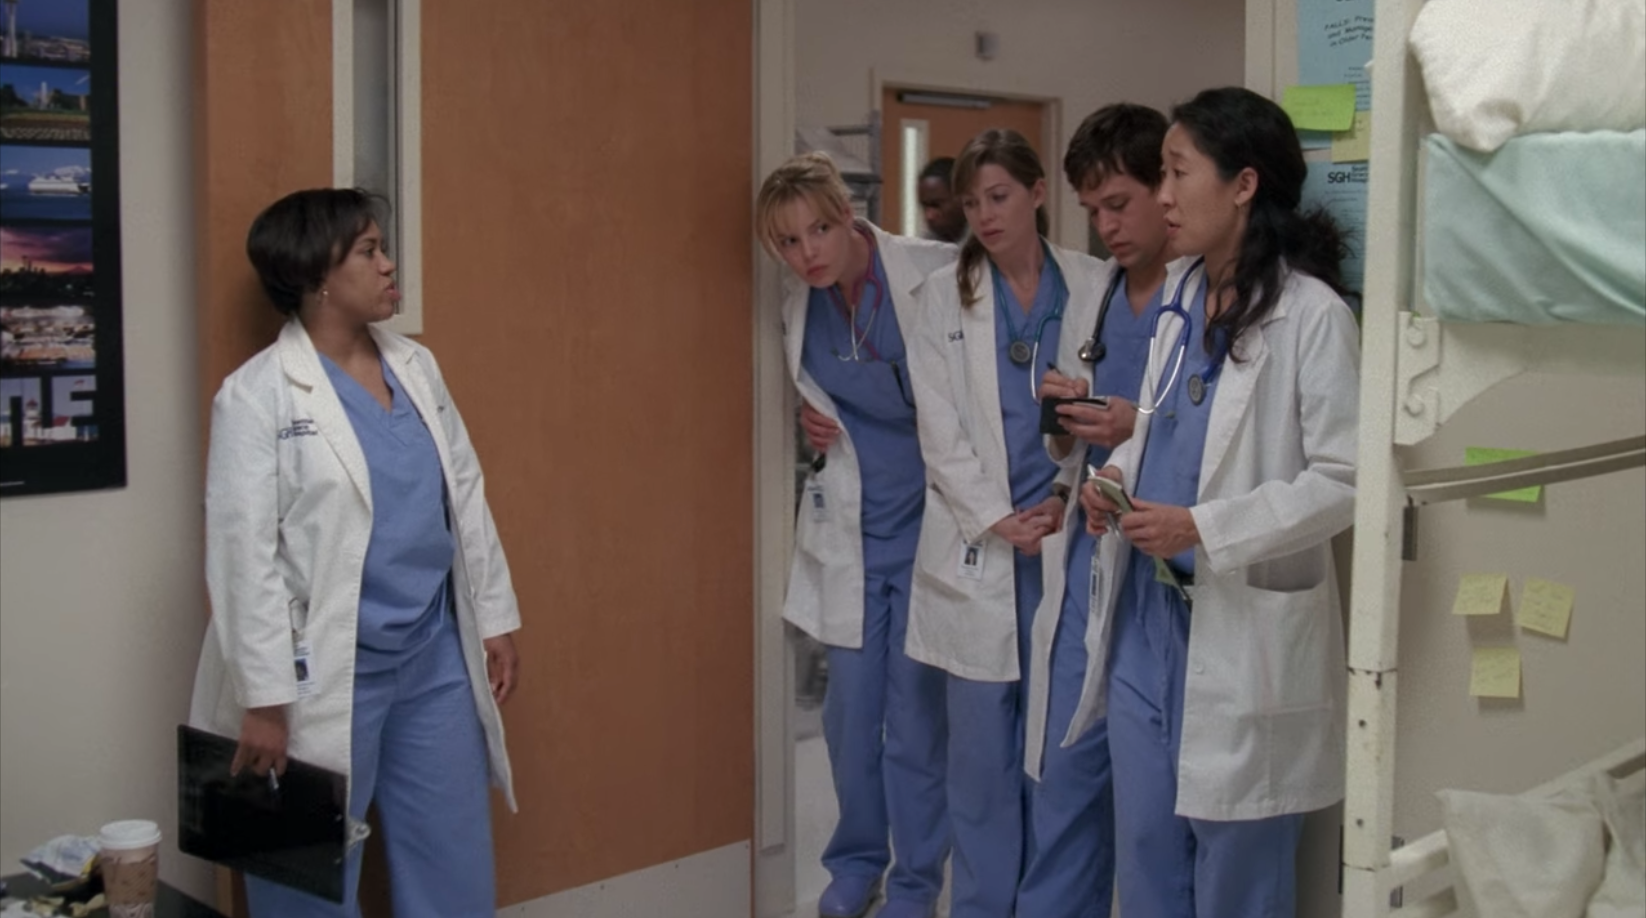 Bailey gives the interns a dressing down at Seattle Grace Hospital in Grey's Anatomy